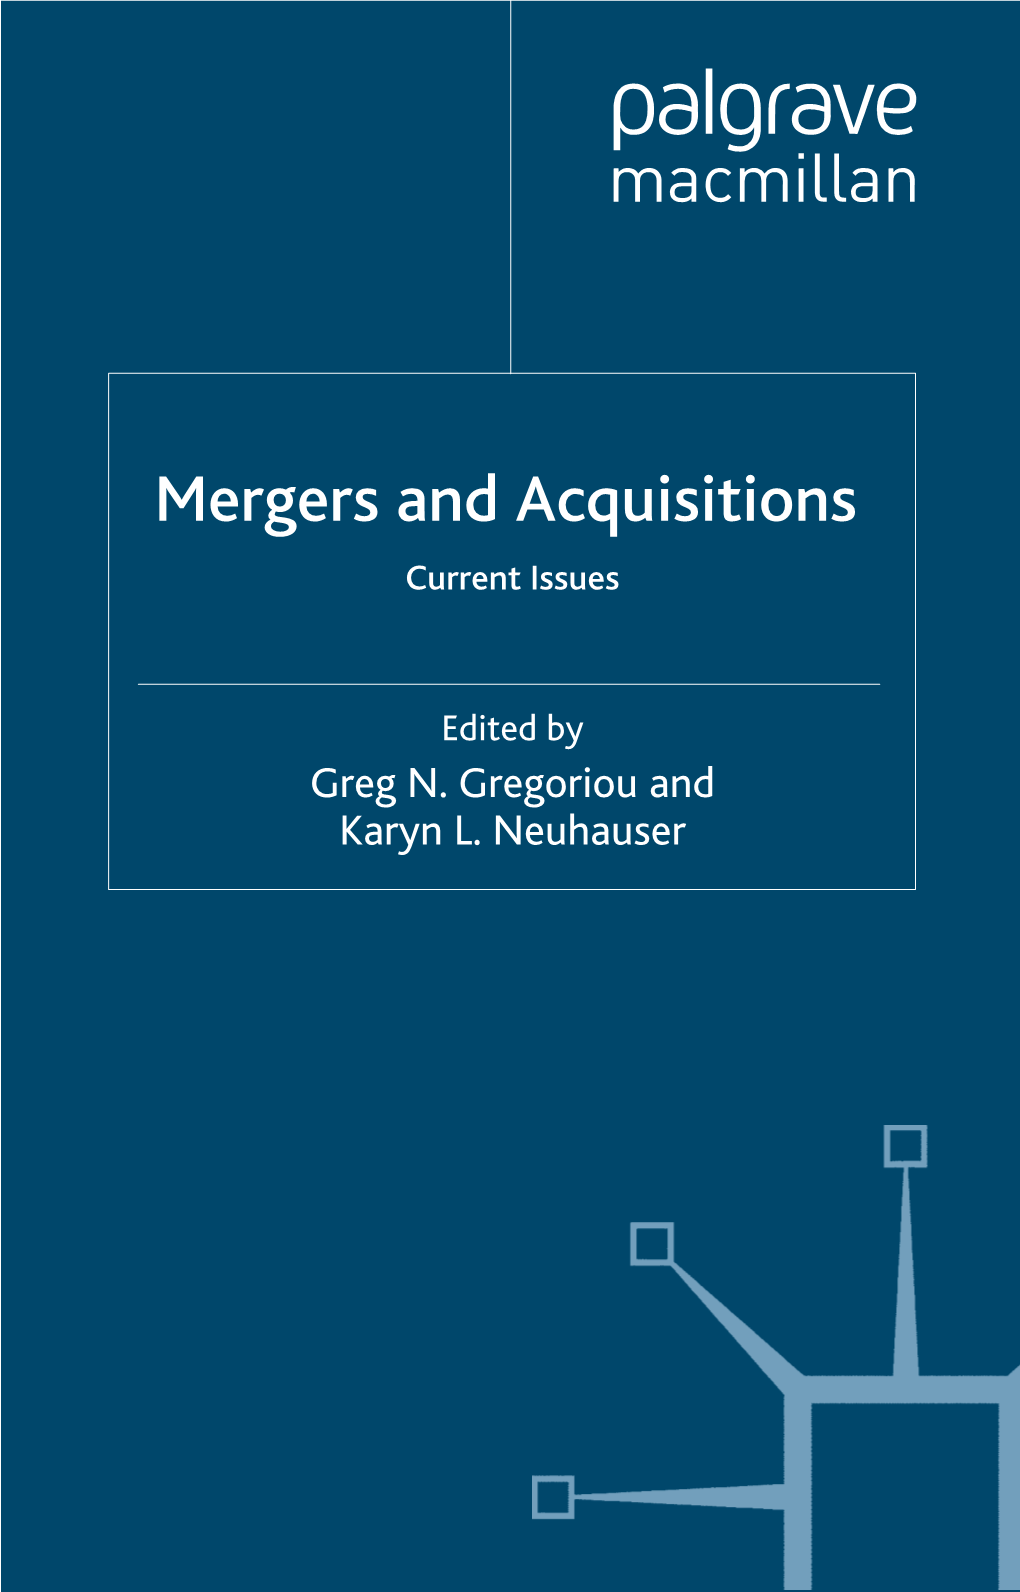 Mergers and Acquisitions: Current Issues